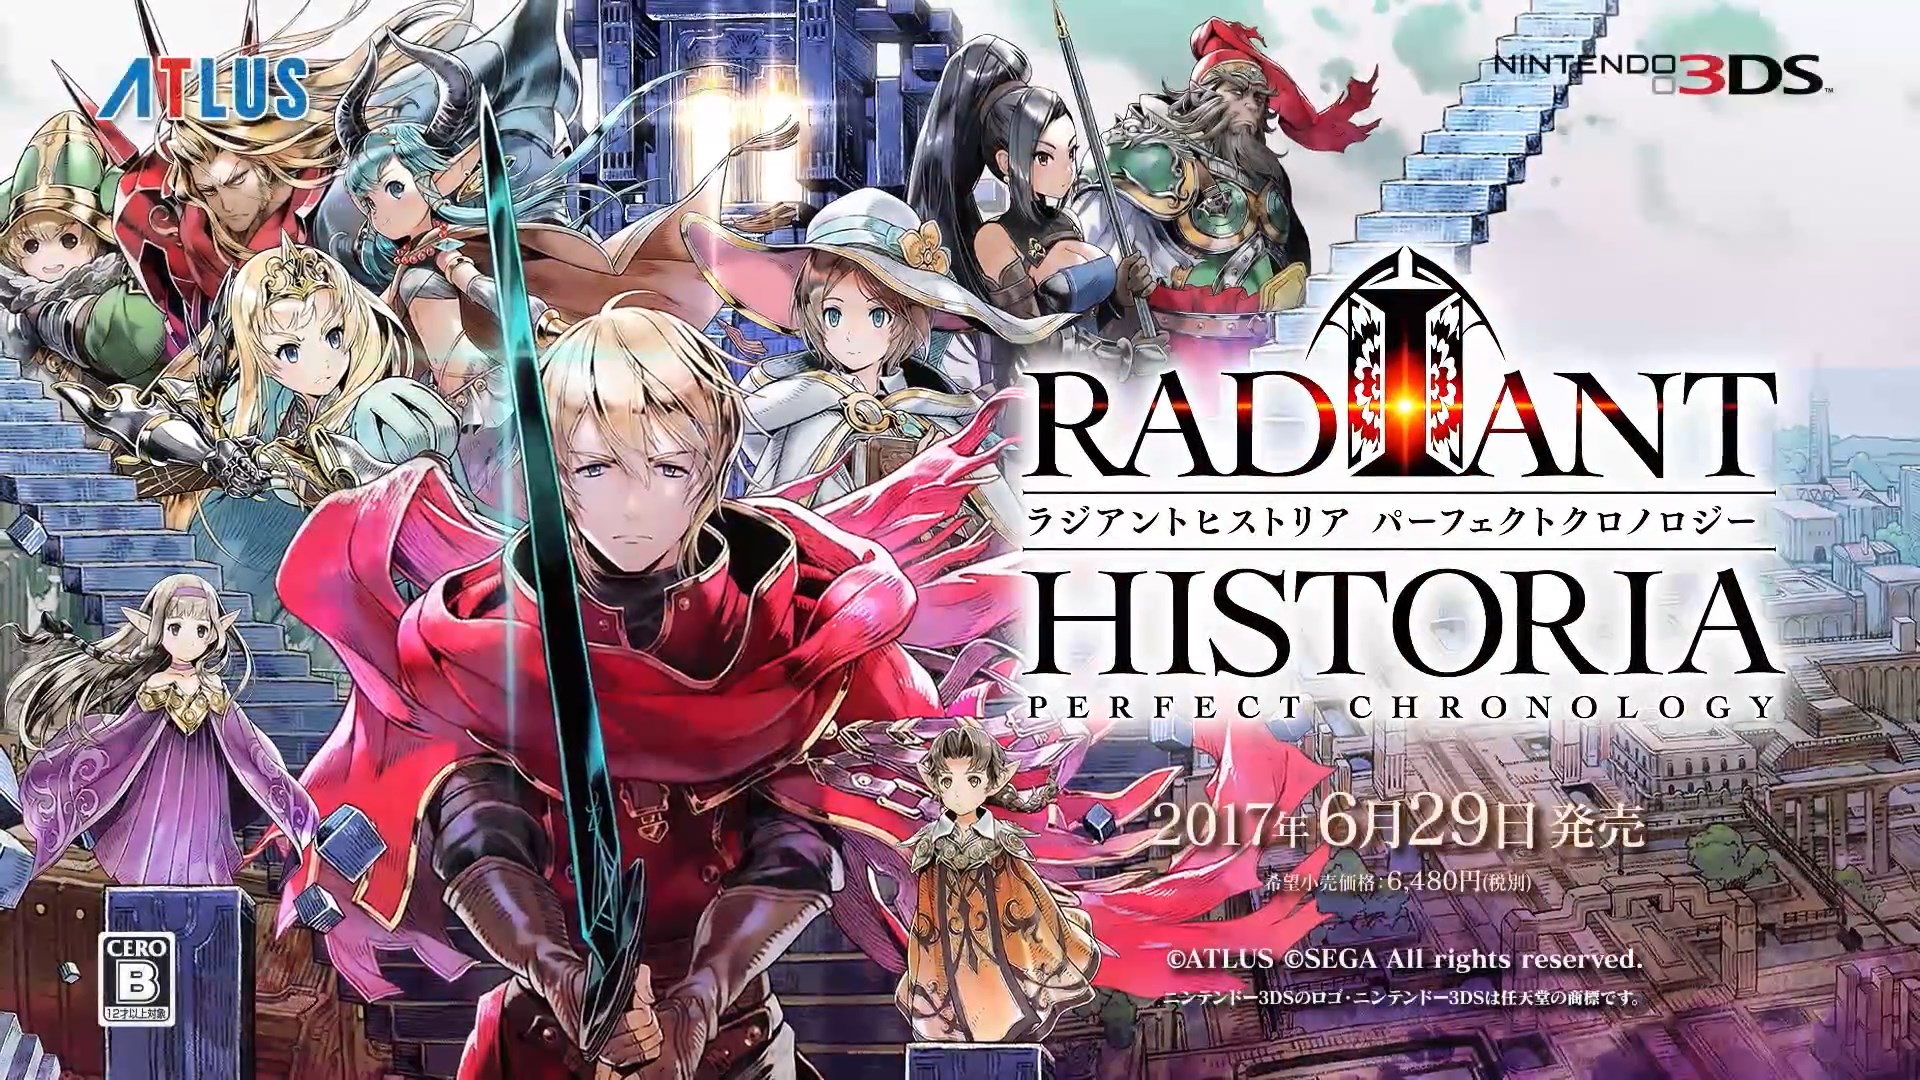 Radiant Historia - Perfect Chronology Debut Trailer 2